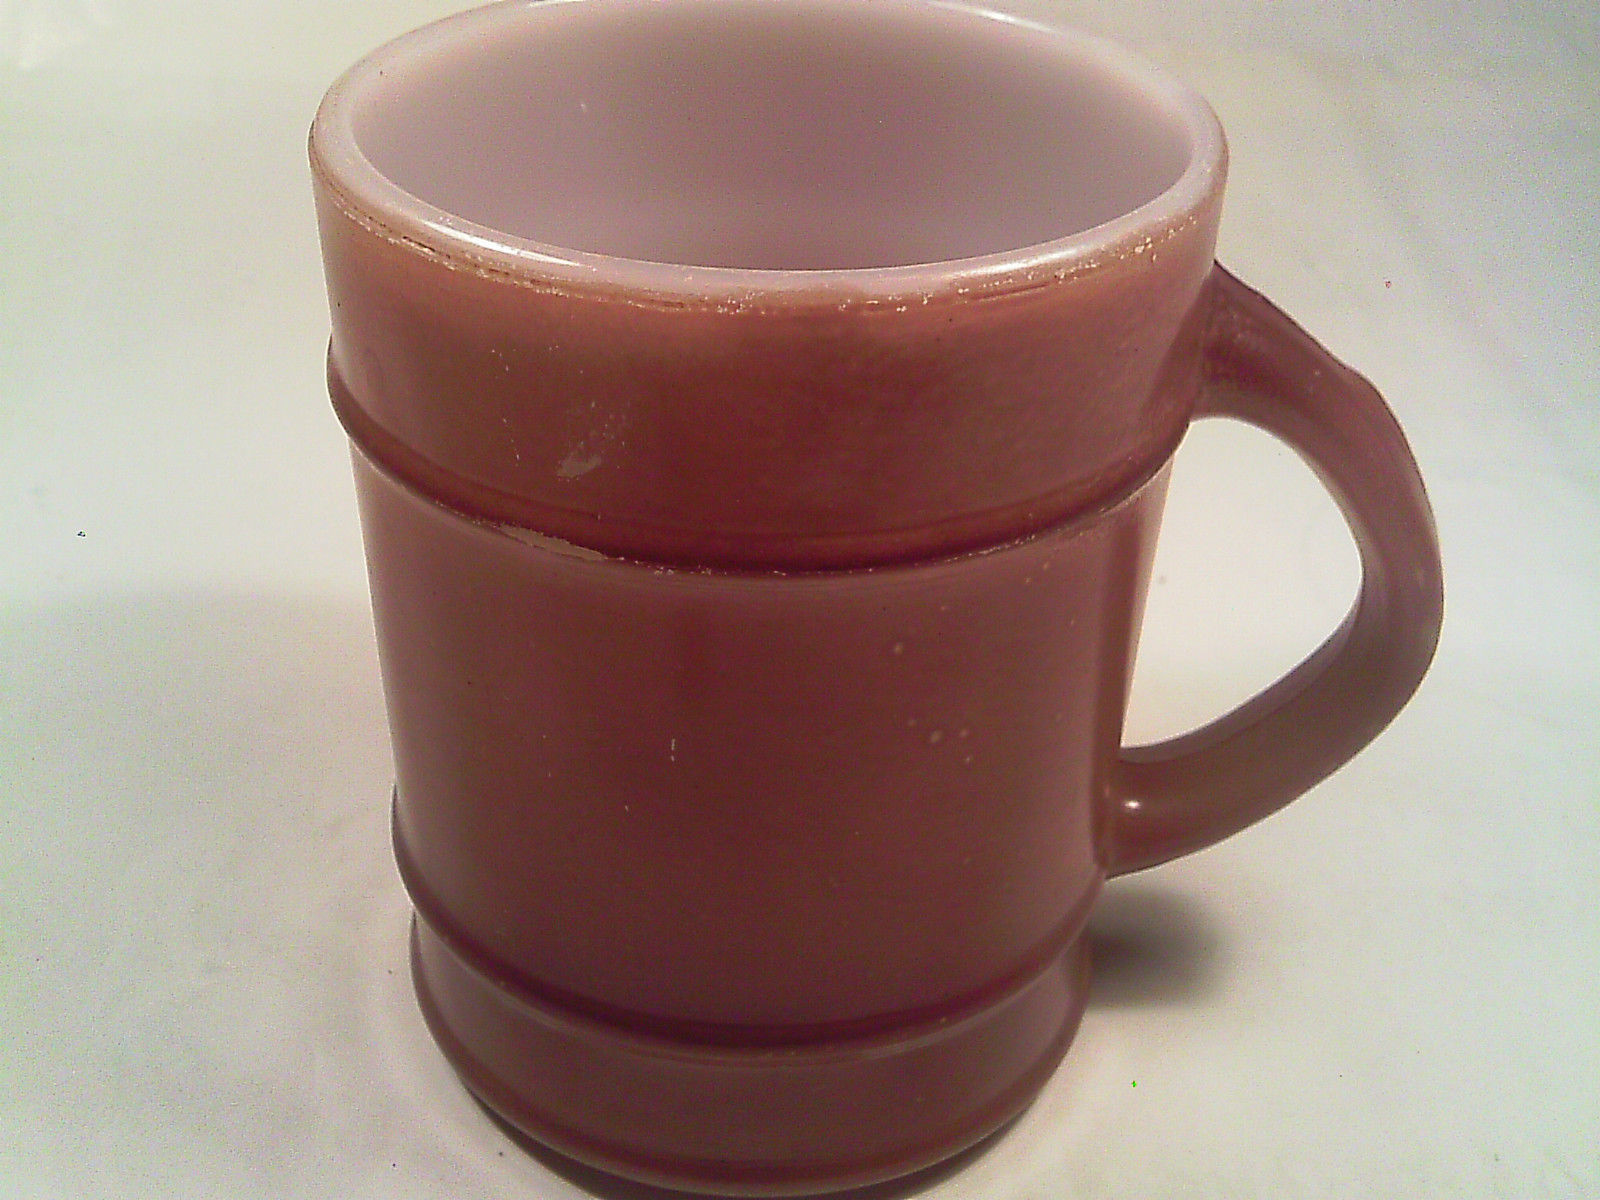 Primary image for [Q18] VINTAGE FIRE KING Oven Ware Coffee Cup, ANCHOR HOCKING Brown ribbed #21